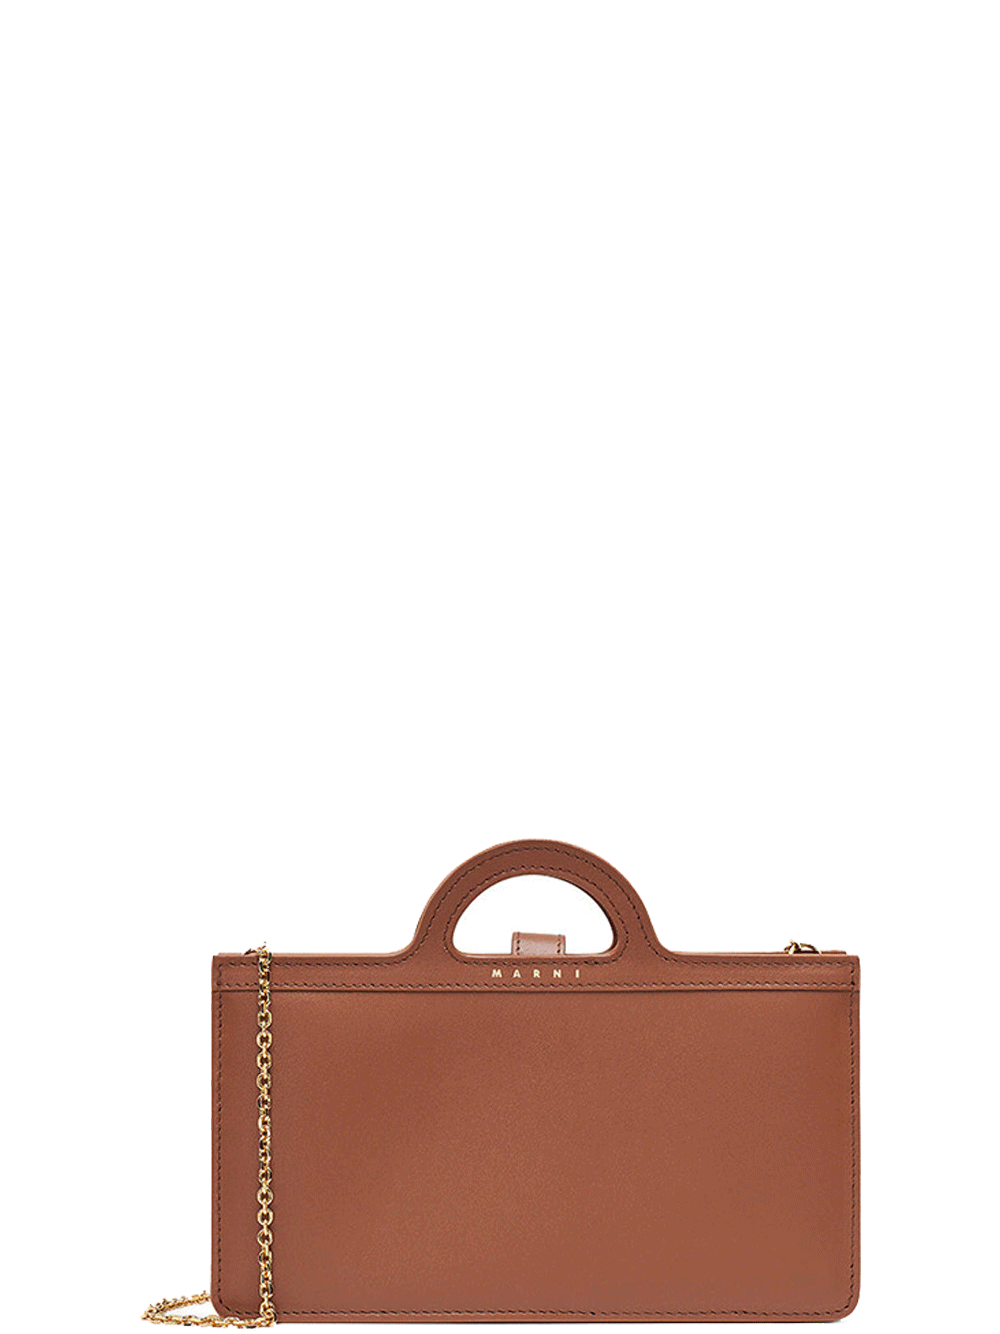 Marni Long Wallet With Chain In Calf Leather Brown 1